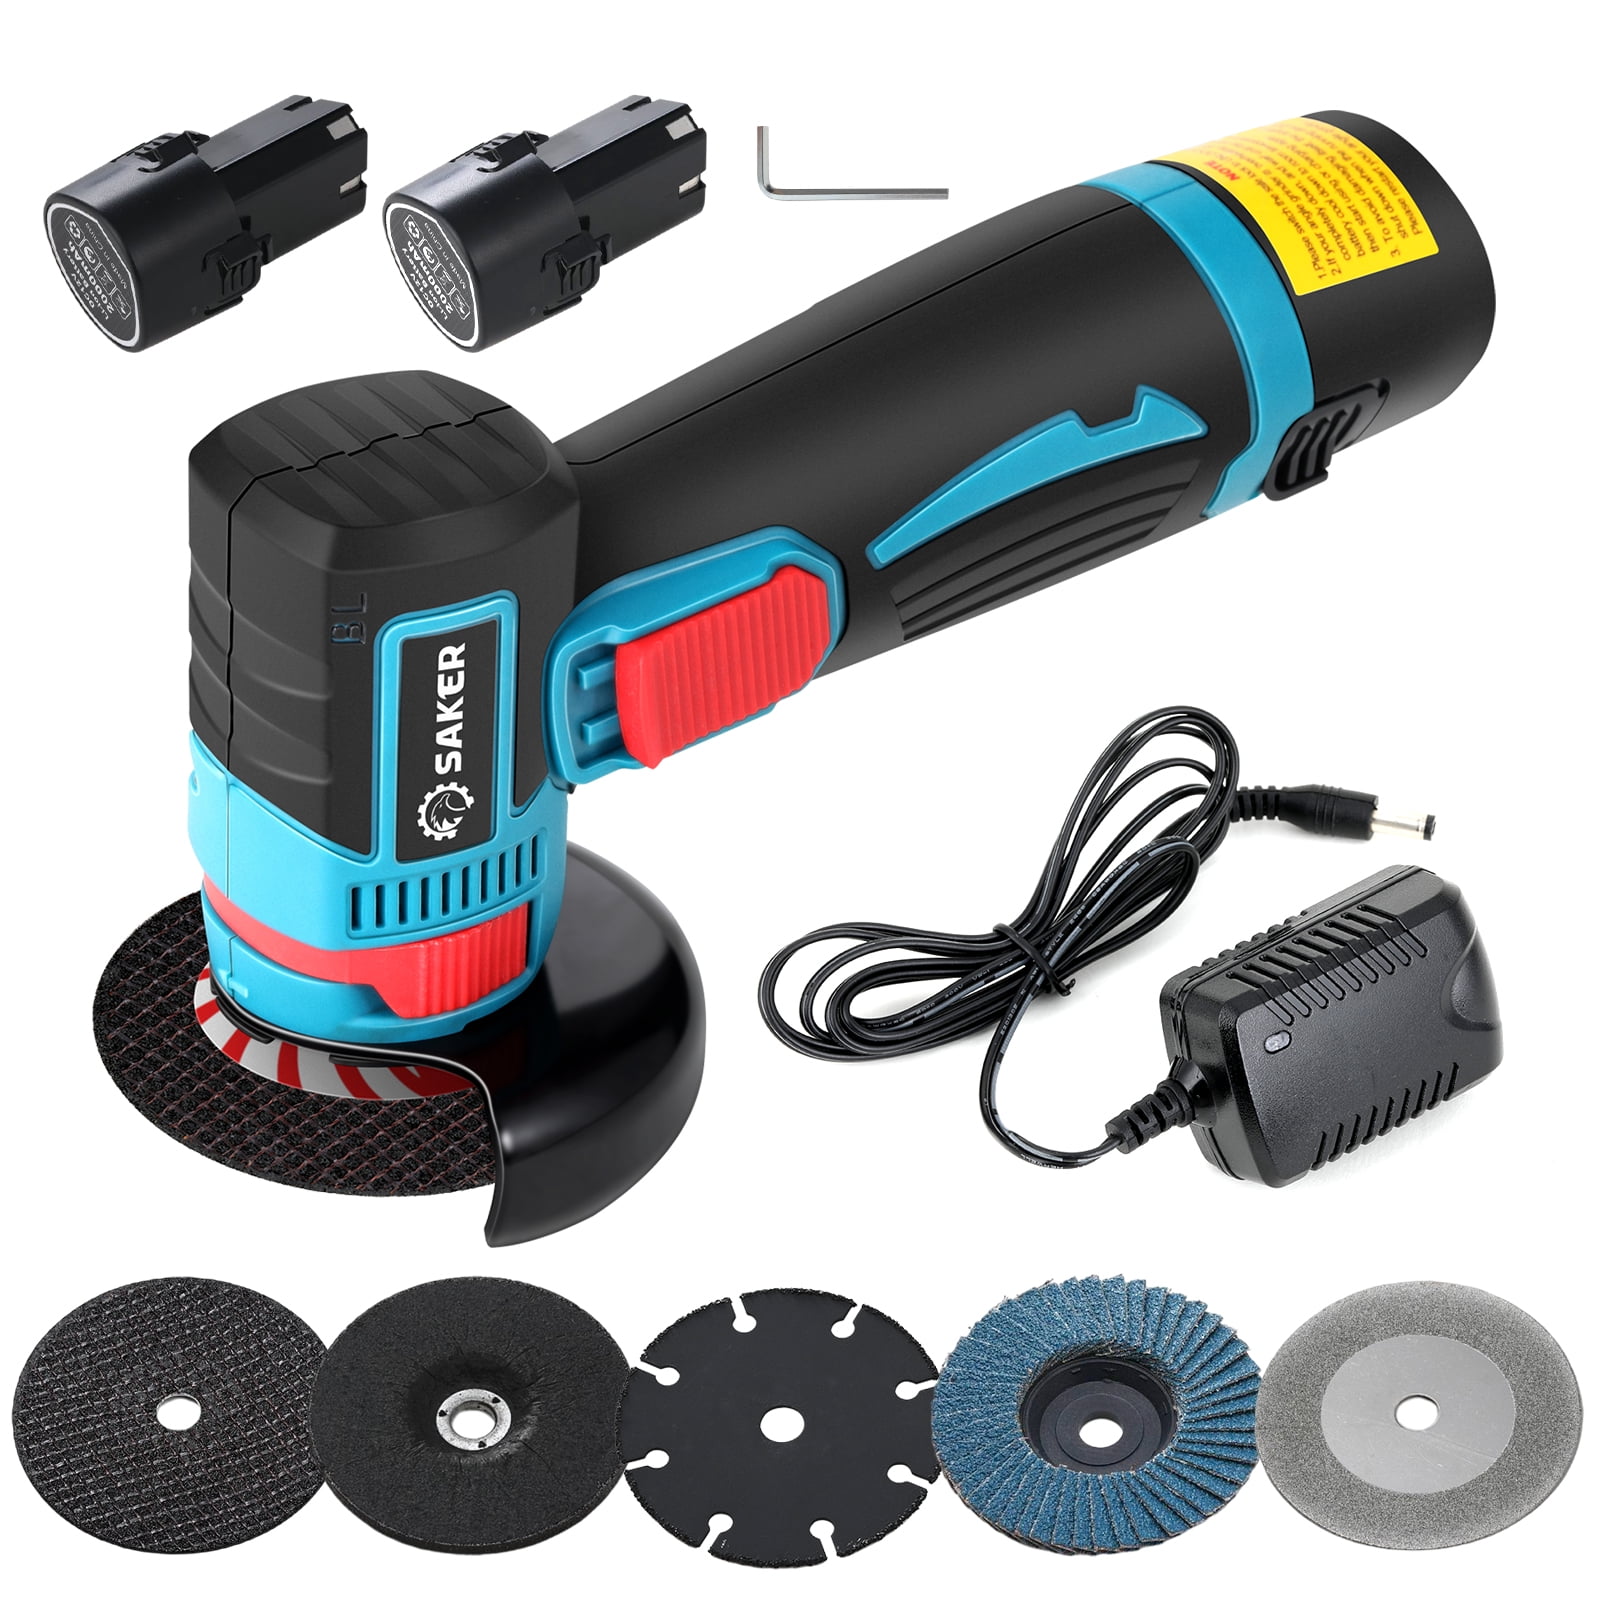 Saker Brushless Angle Grinder - 12V 16800 RPM Cordless Grinder Cut off Tool  Kit with Extra 5 PCS Disc (2PC Batteries & Charger)